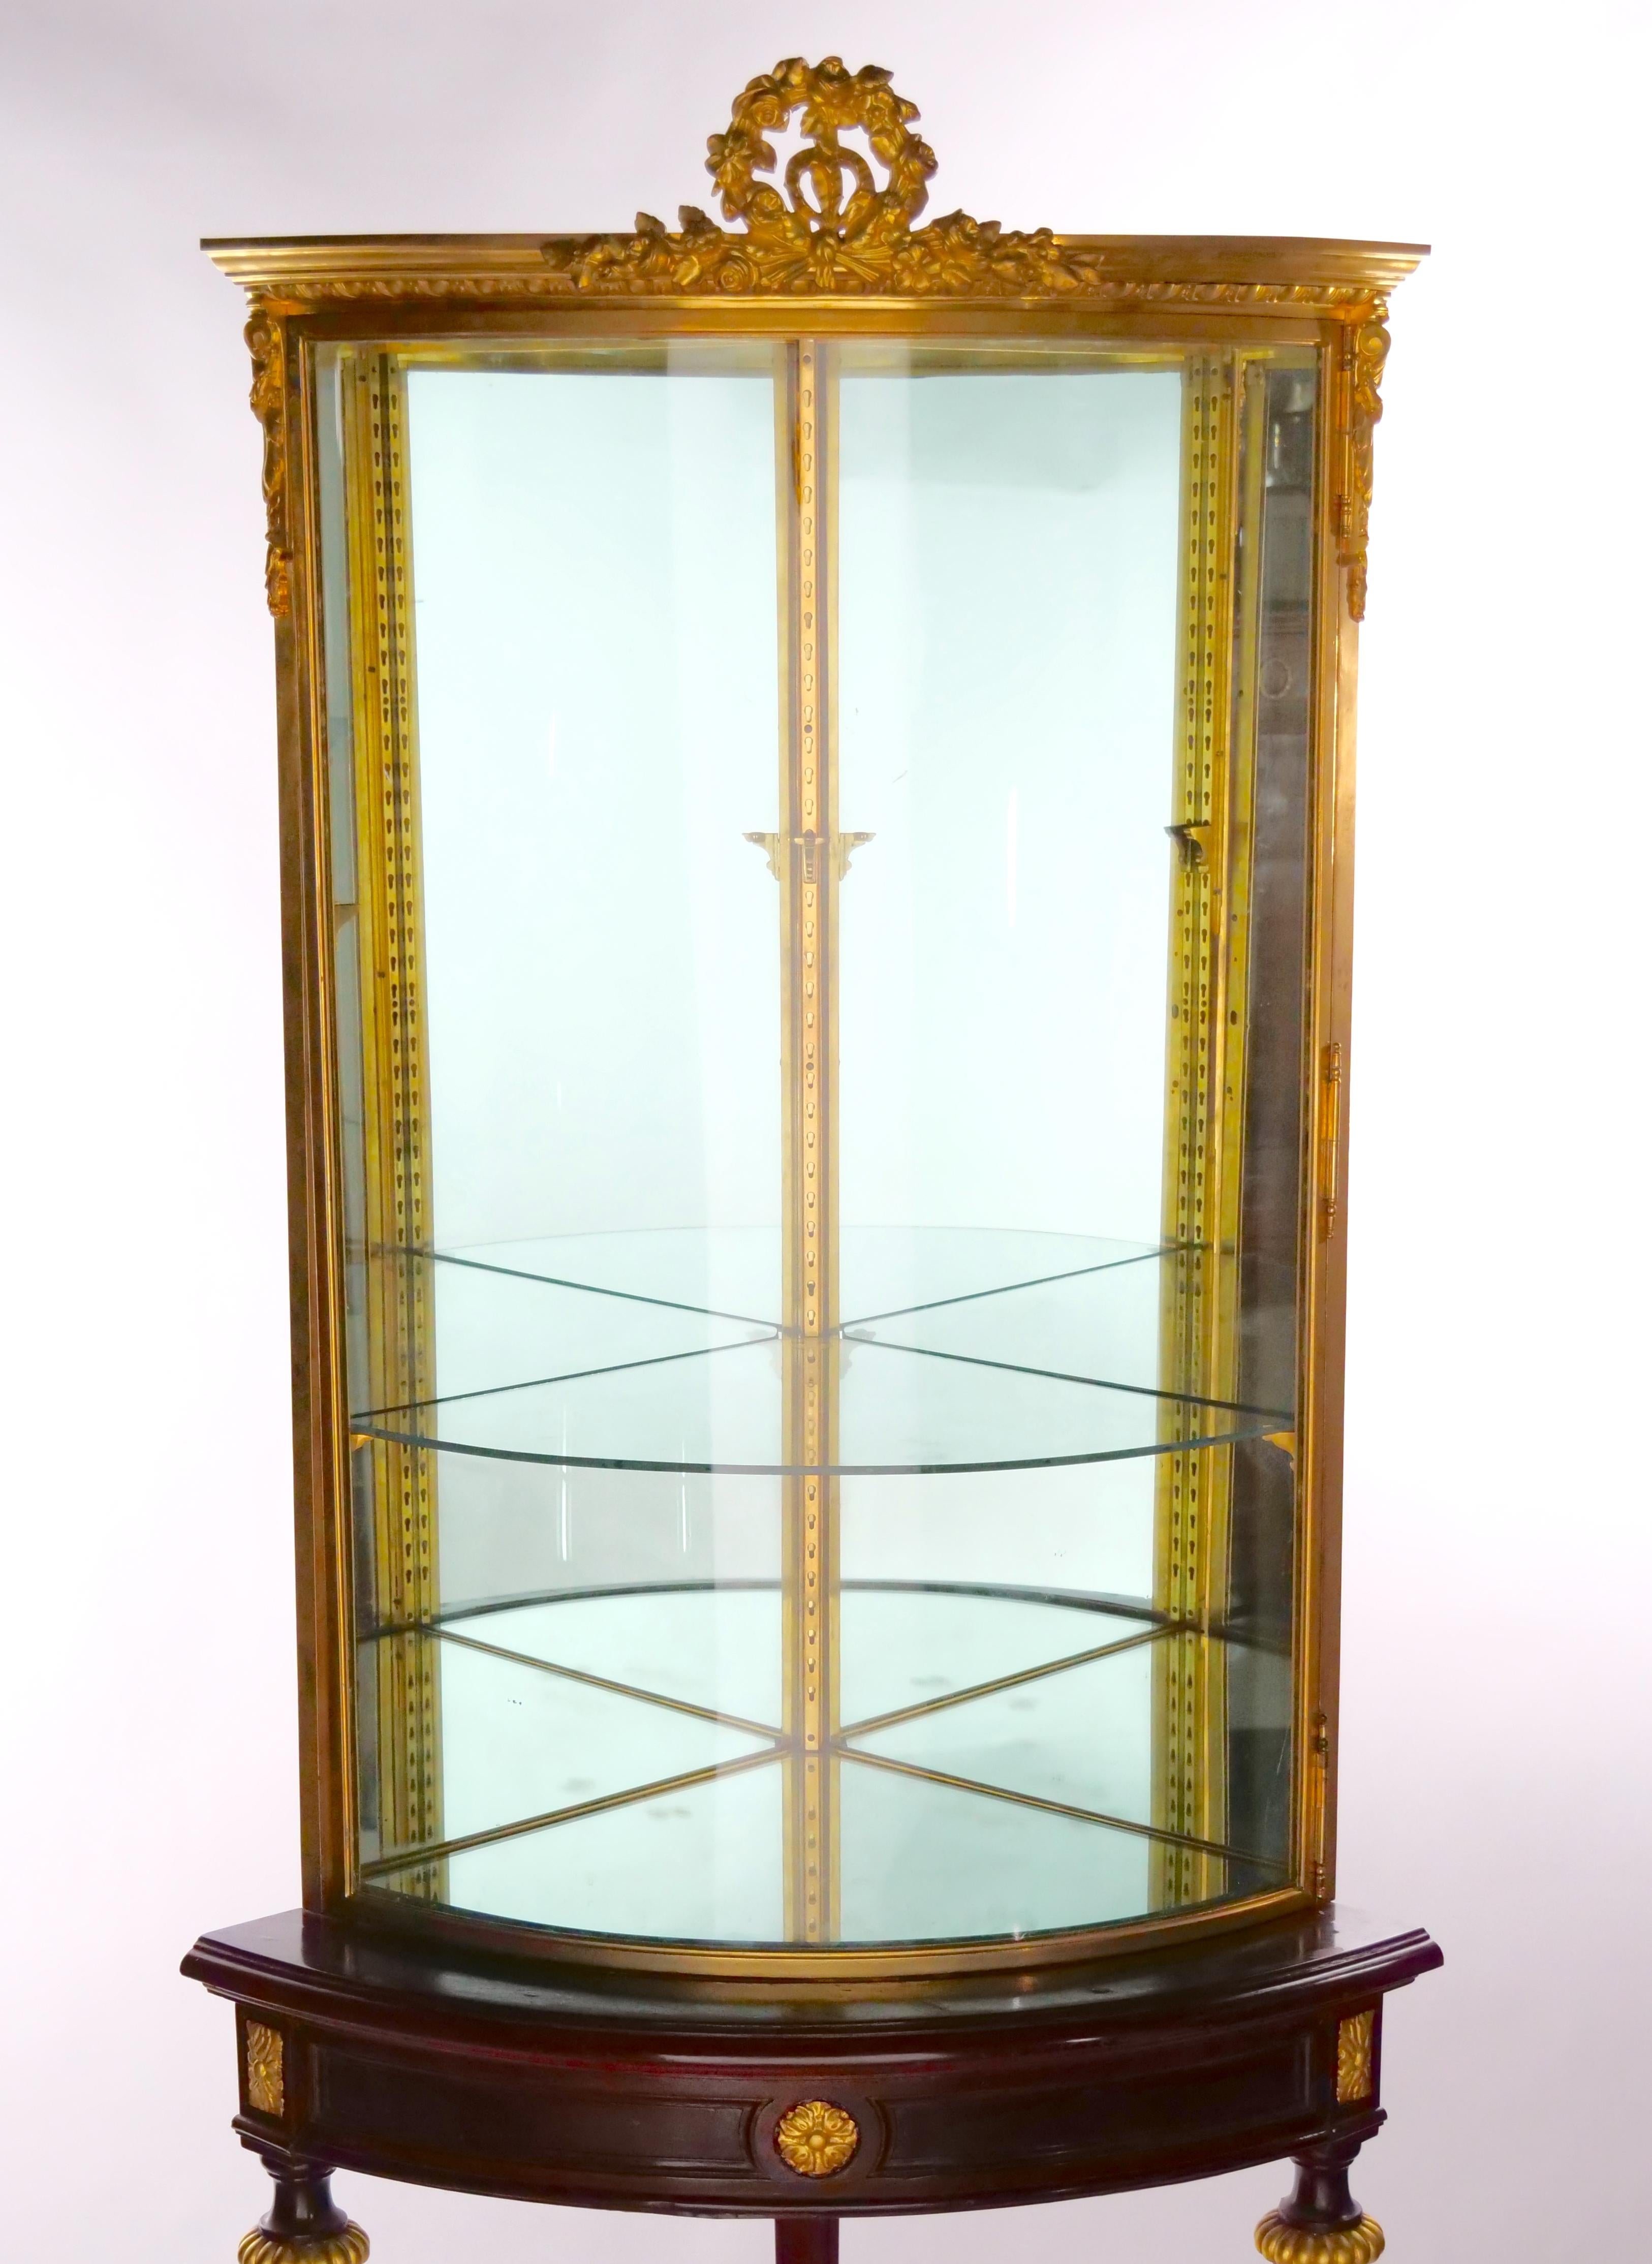 French two piece gilt bronze mounted and glass frame with gilt accent mahogany wood frame holding base curio cornered display cabinet. The curio / vitrine cornered cabinet features a demilune shape , giltwood legs with a Y shape stretcher bar with a